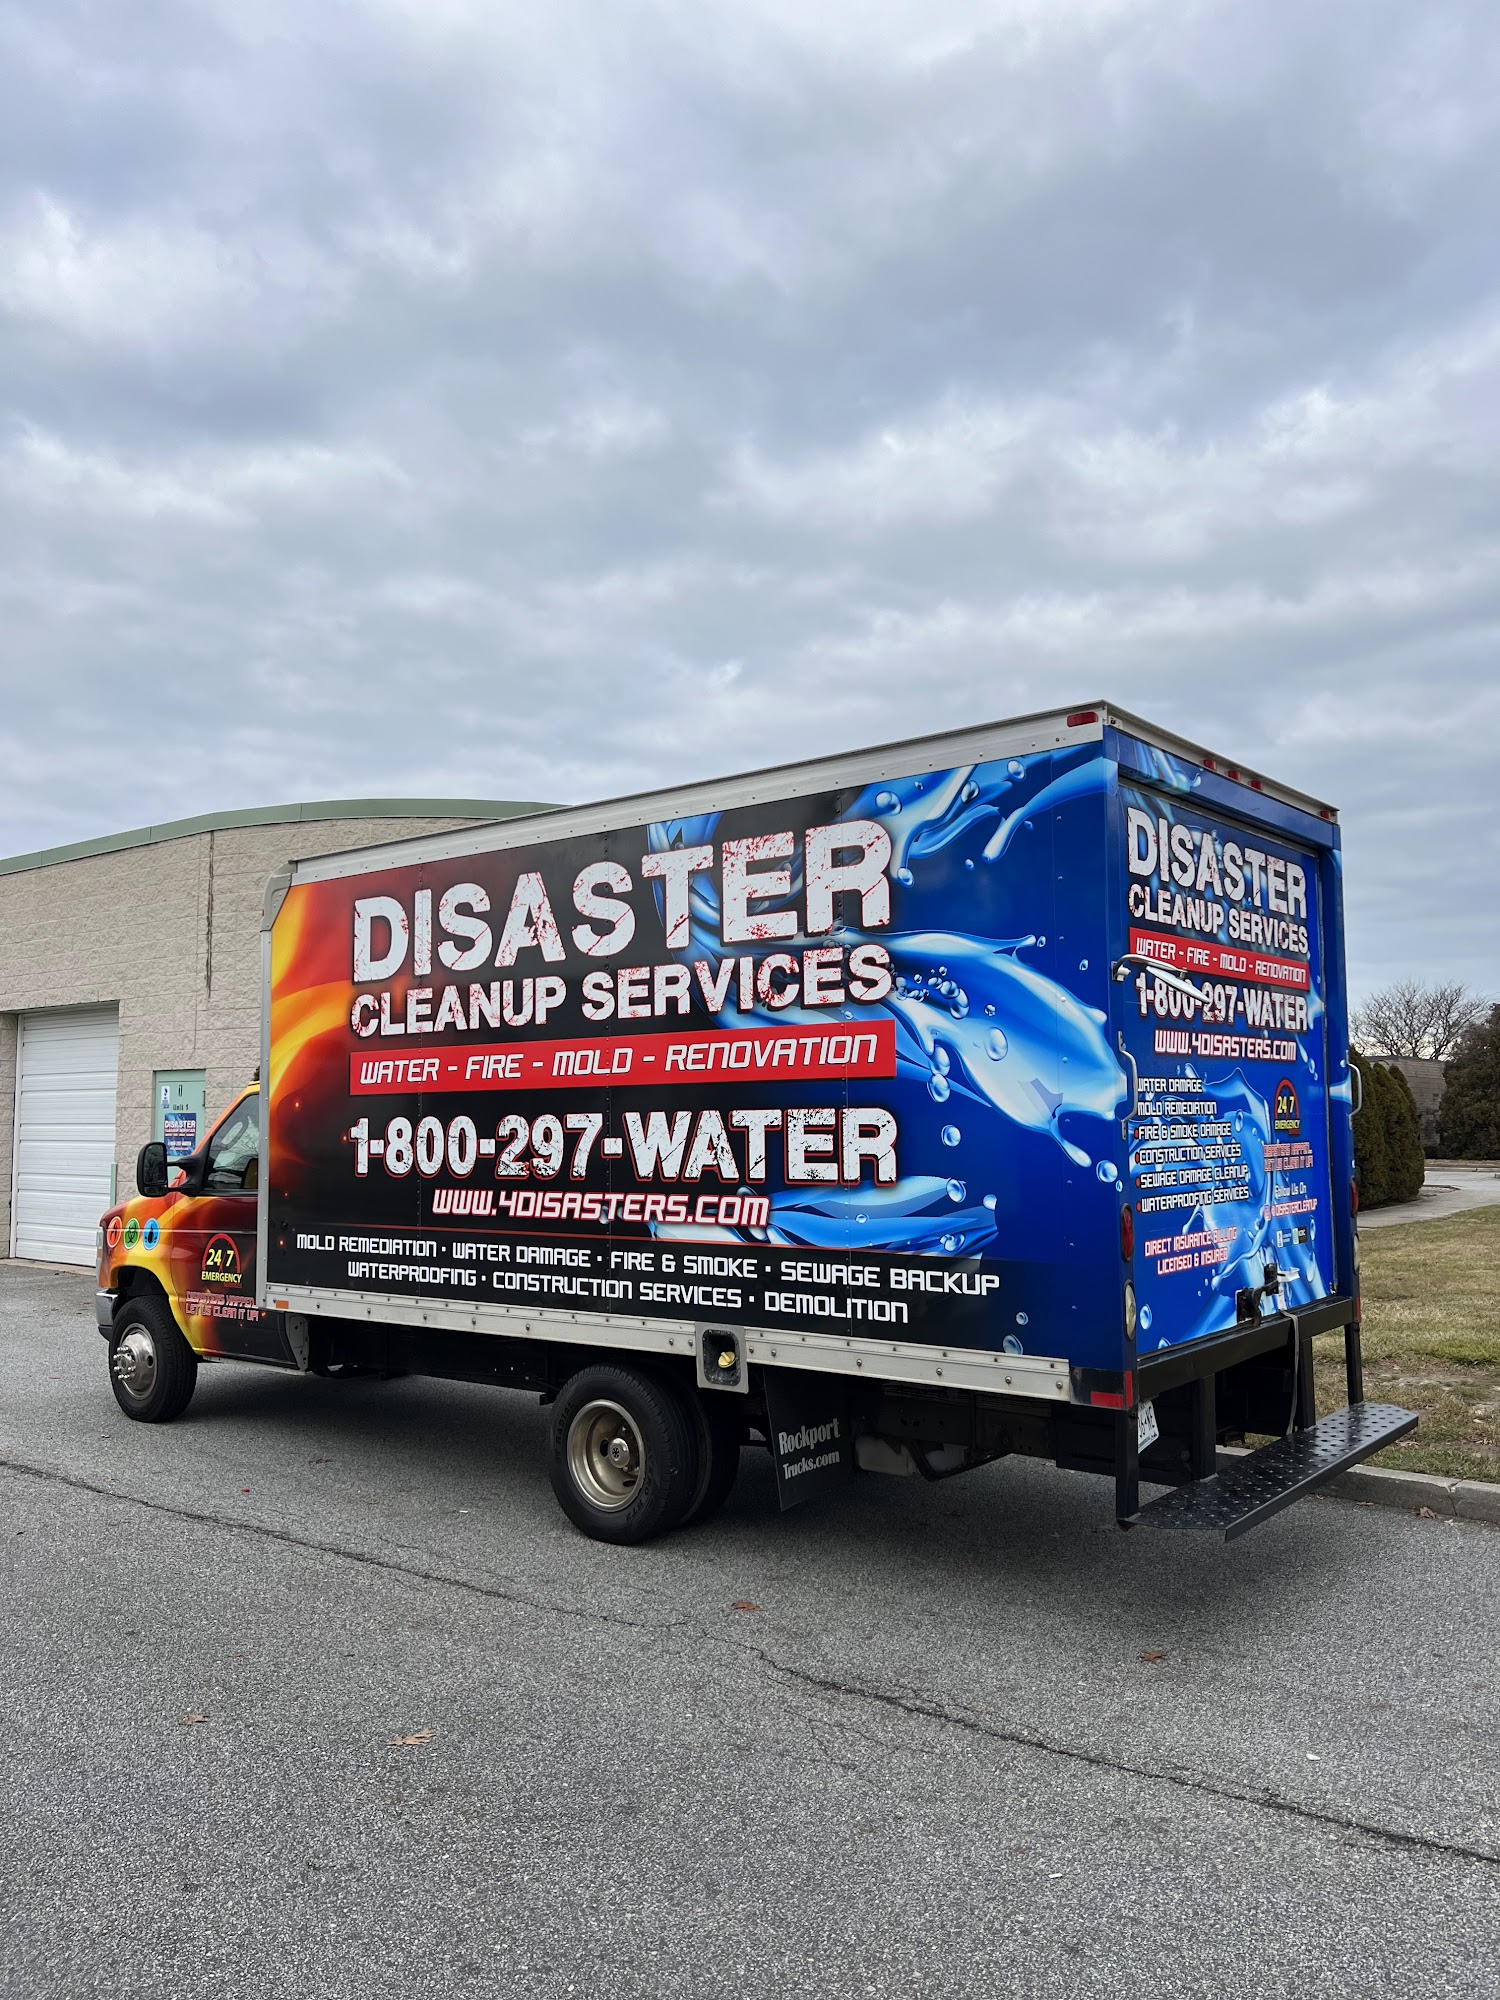 Disaster Cleanup Services, Inc